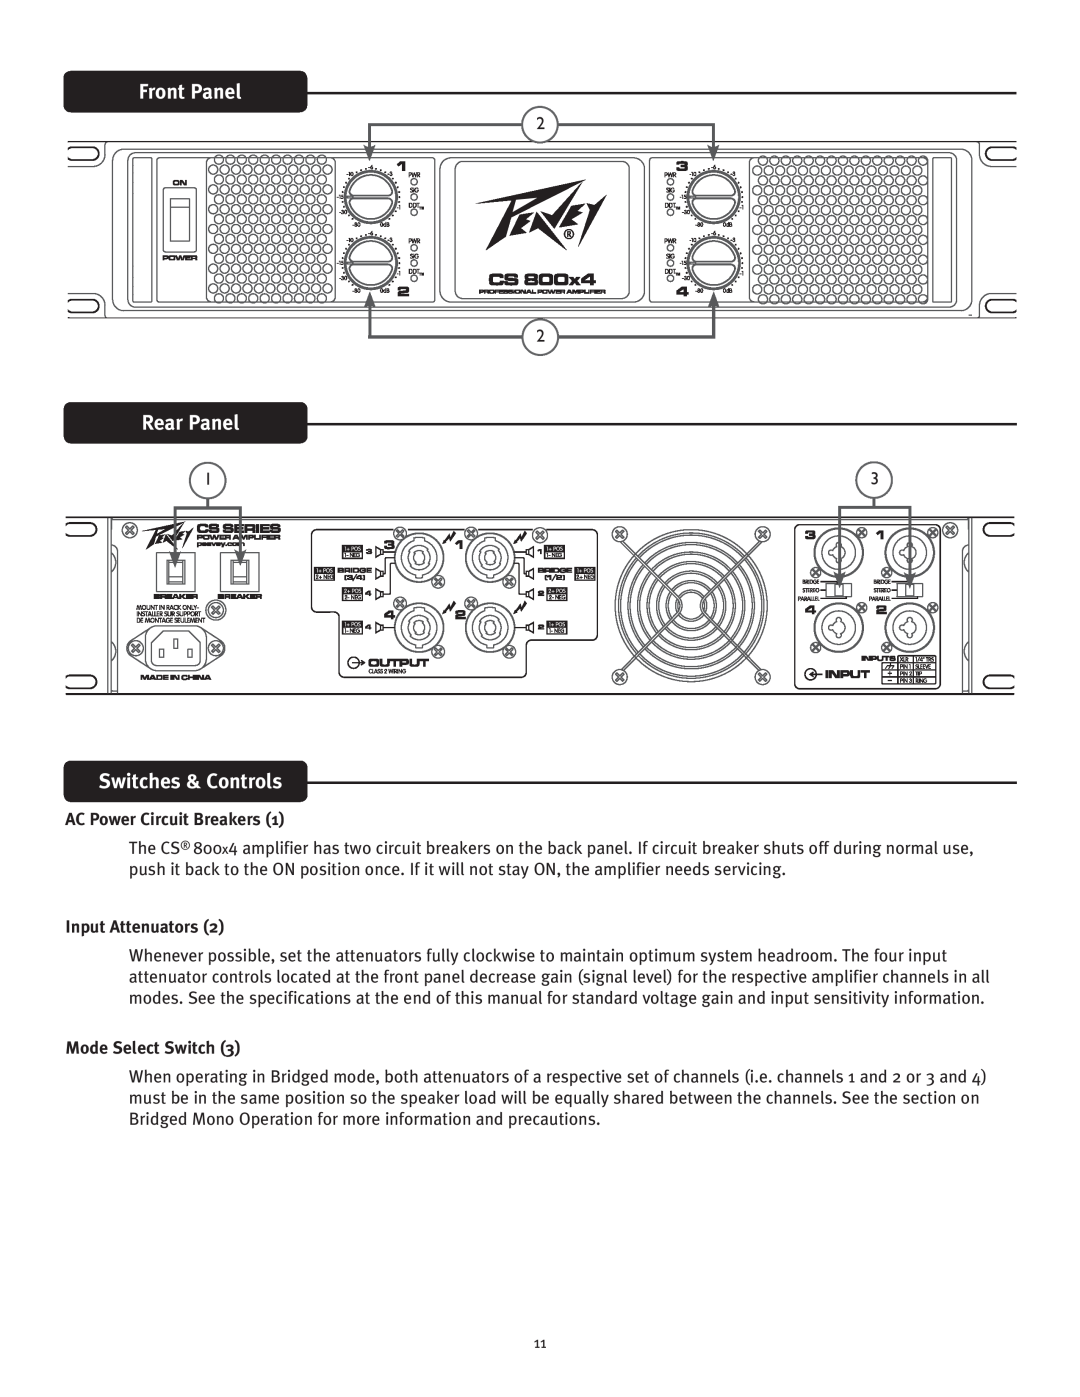 Peavey CS 800x4 owner manual Front Panel, Rear Panel, Switches & Controls, AC Power Circuit Breakers, Input Attenuators 